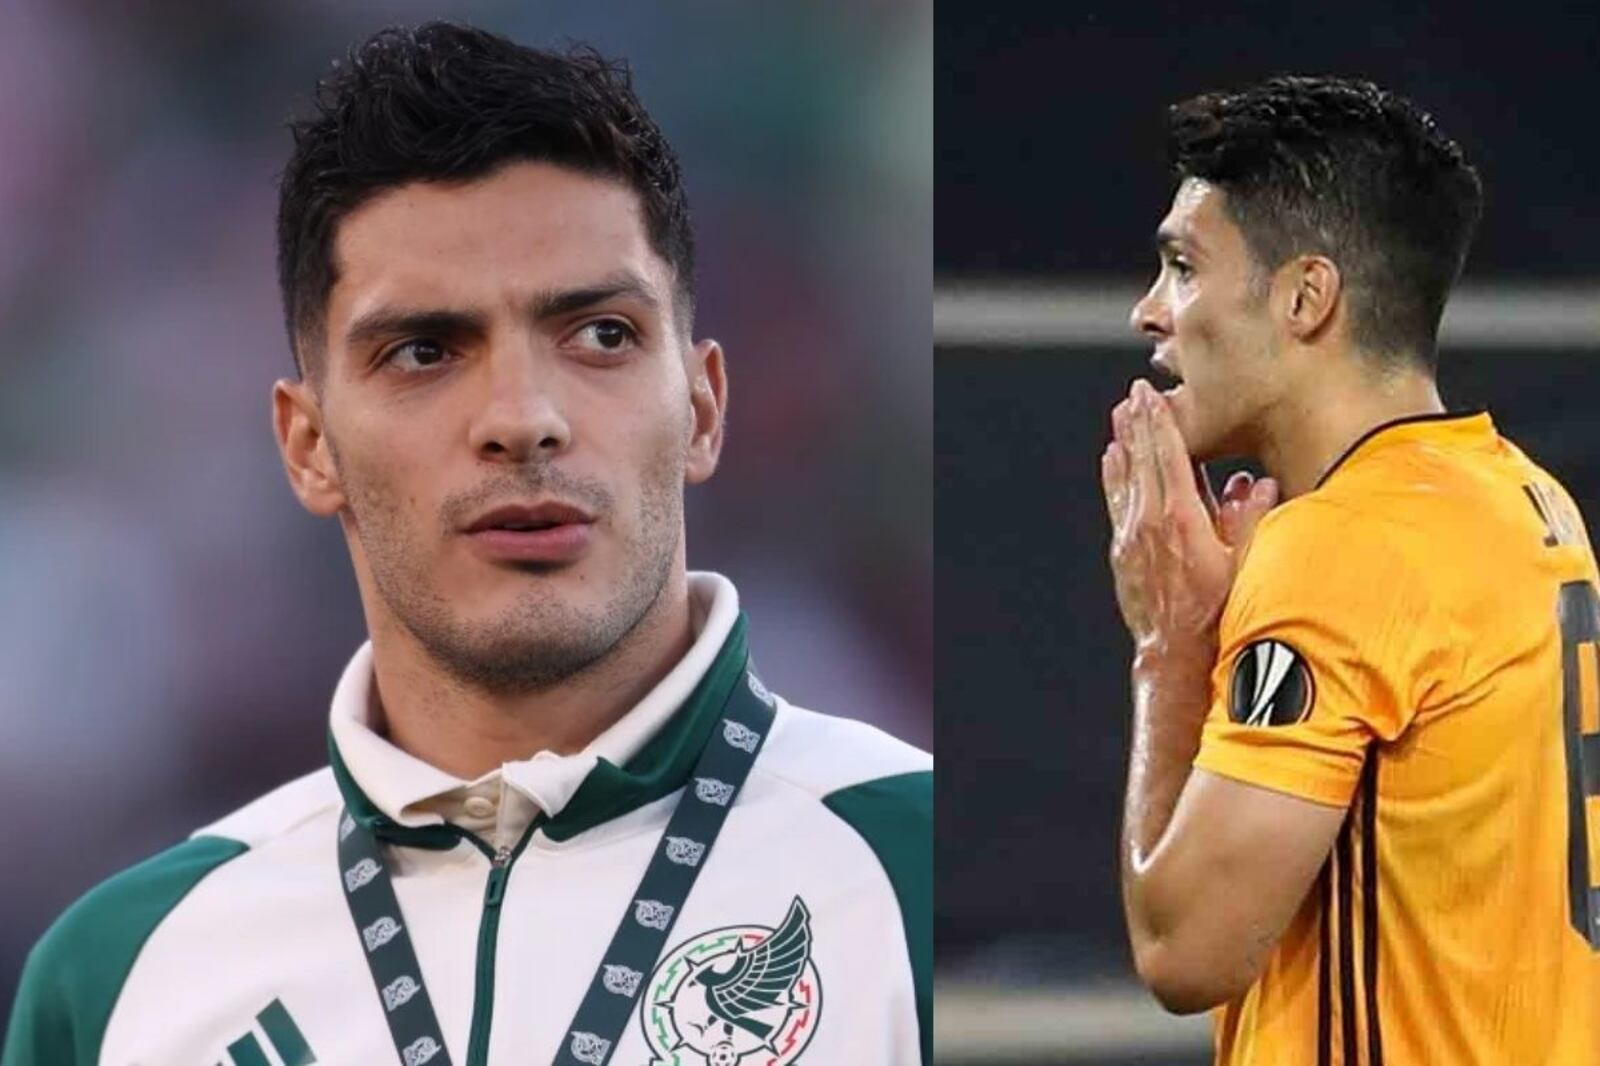 He knocked Raul Jimenez and now he has been taken out of the World Cup for good